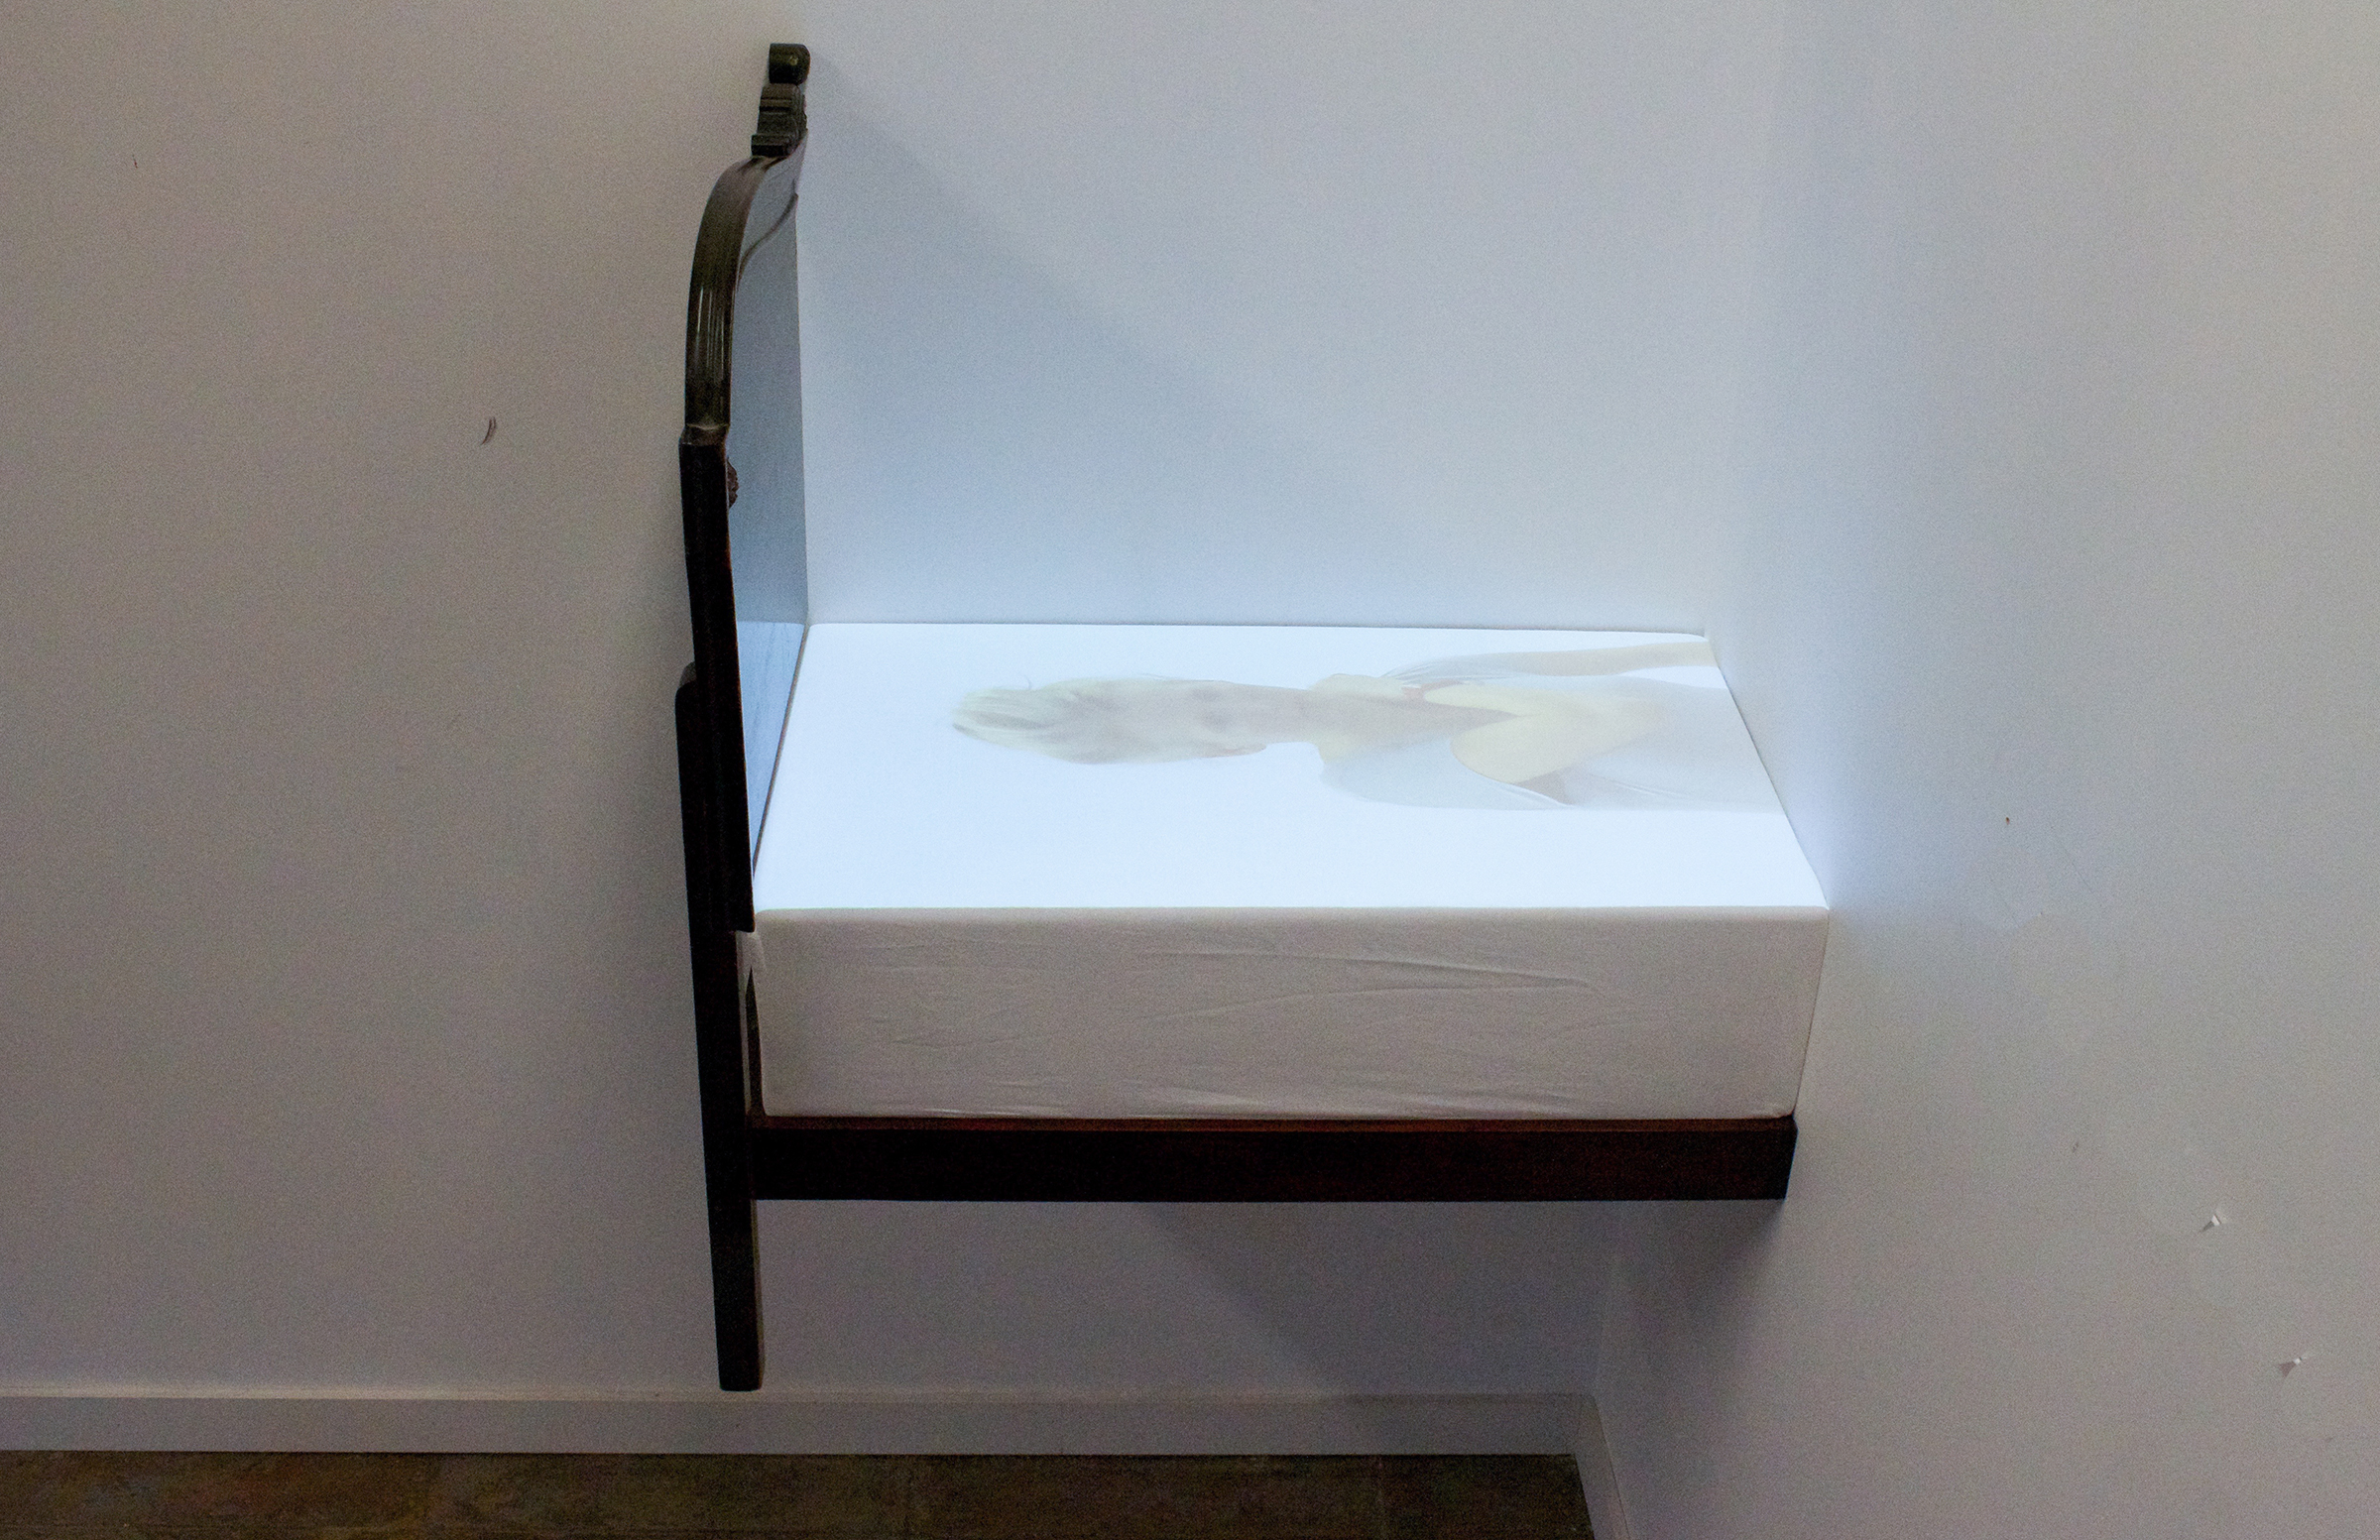 Emily Bivens, Embed - object, Live Feed Video, Projection, 2015 (*also seen in header image)